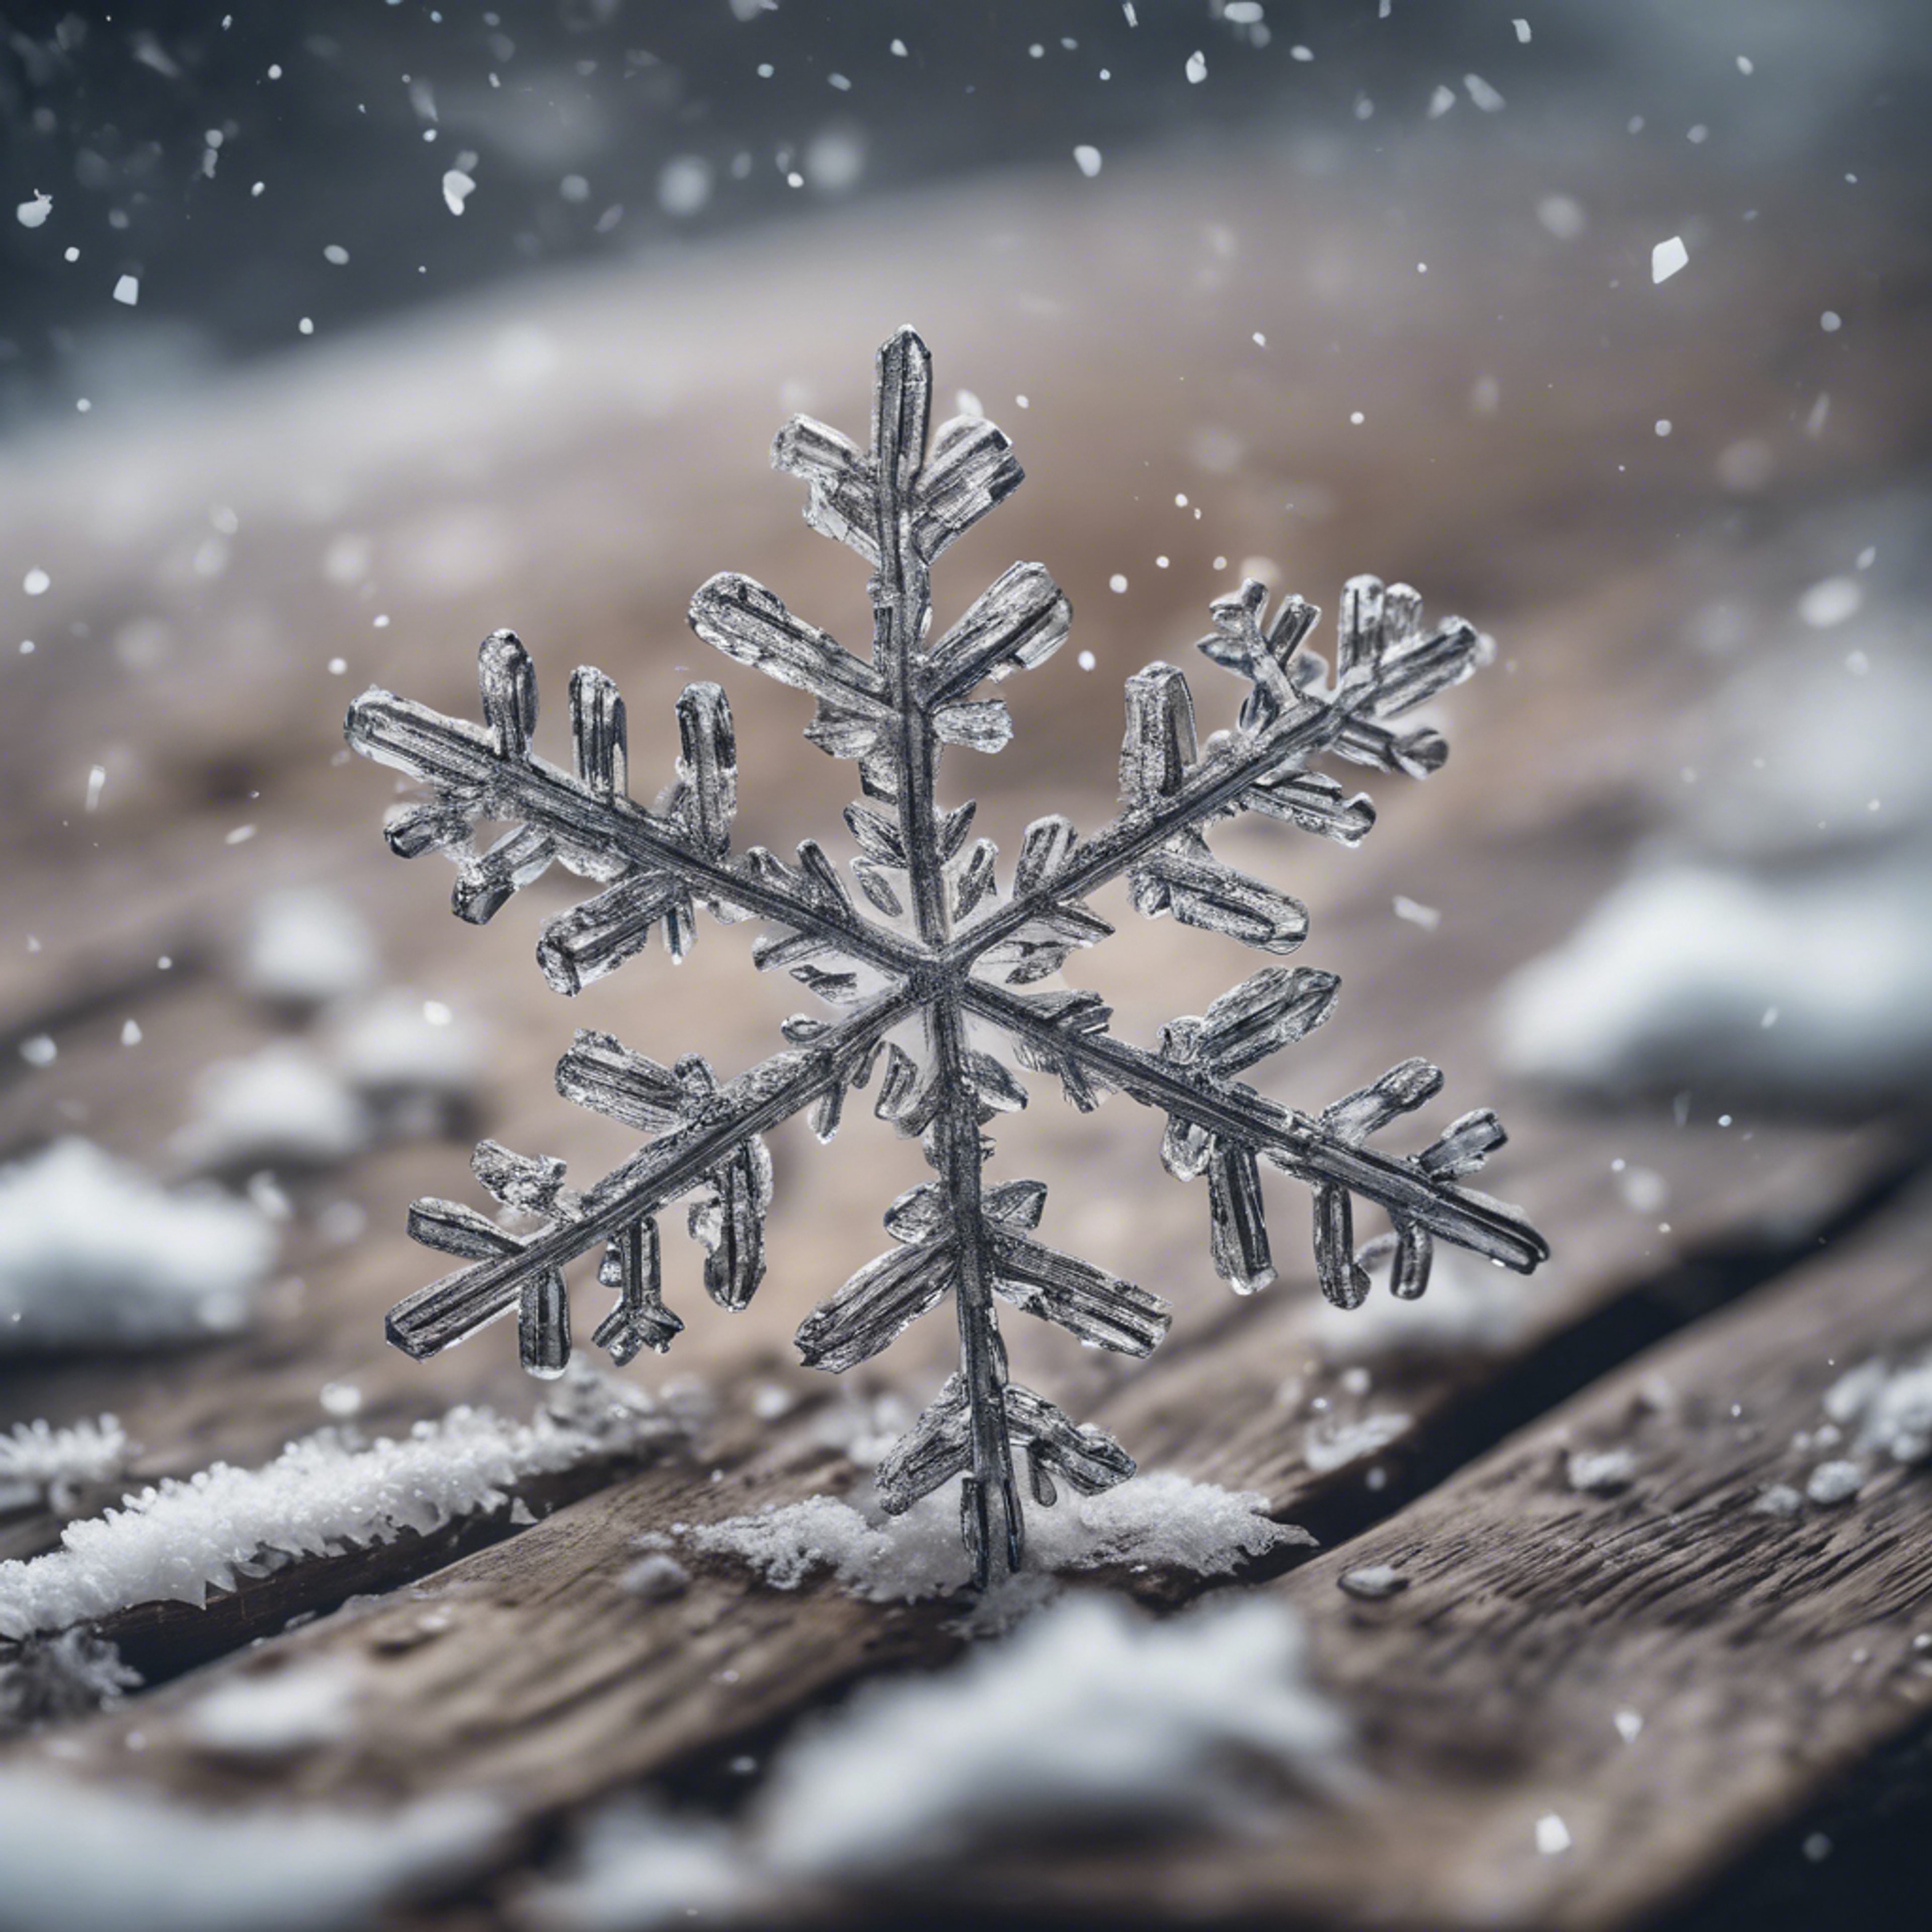 A delicate snowflake lying isolated on a vintage wooden surface, reflecting the beauty of winter. Wallpaper[bec7a6ee64cd4b579882]